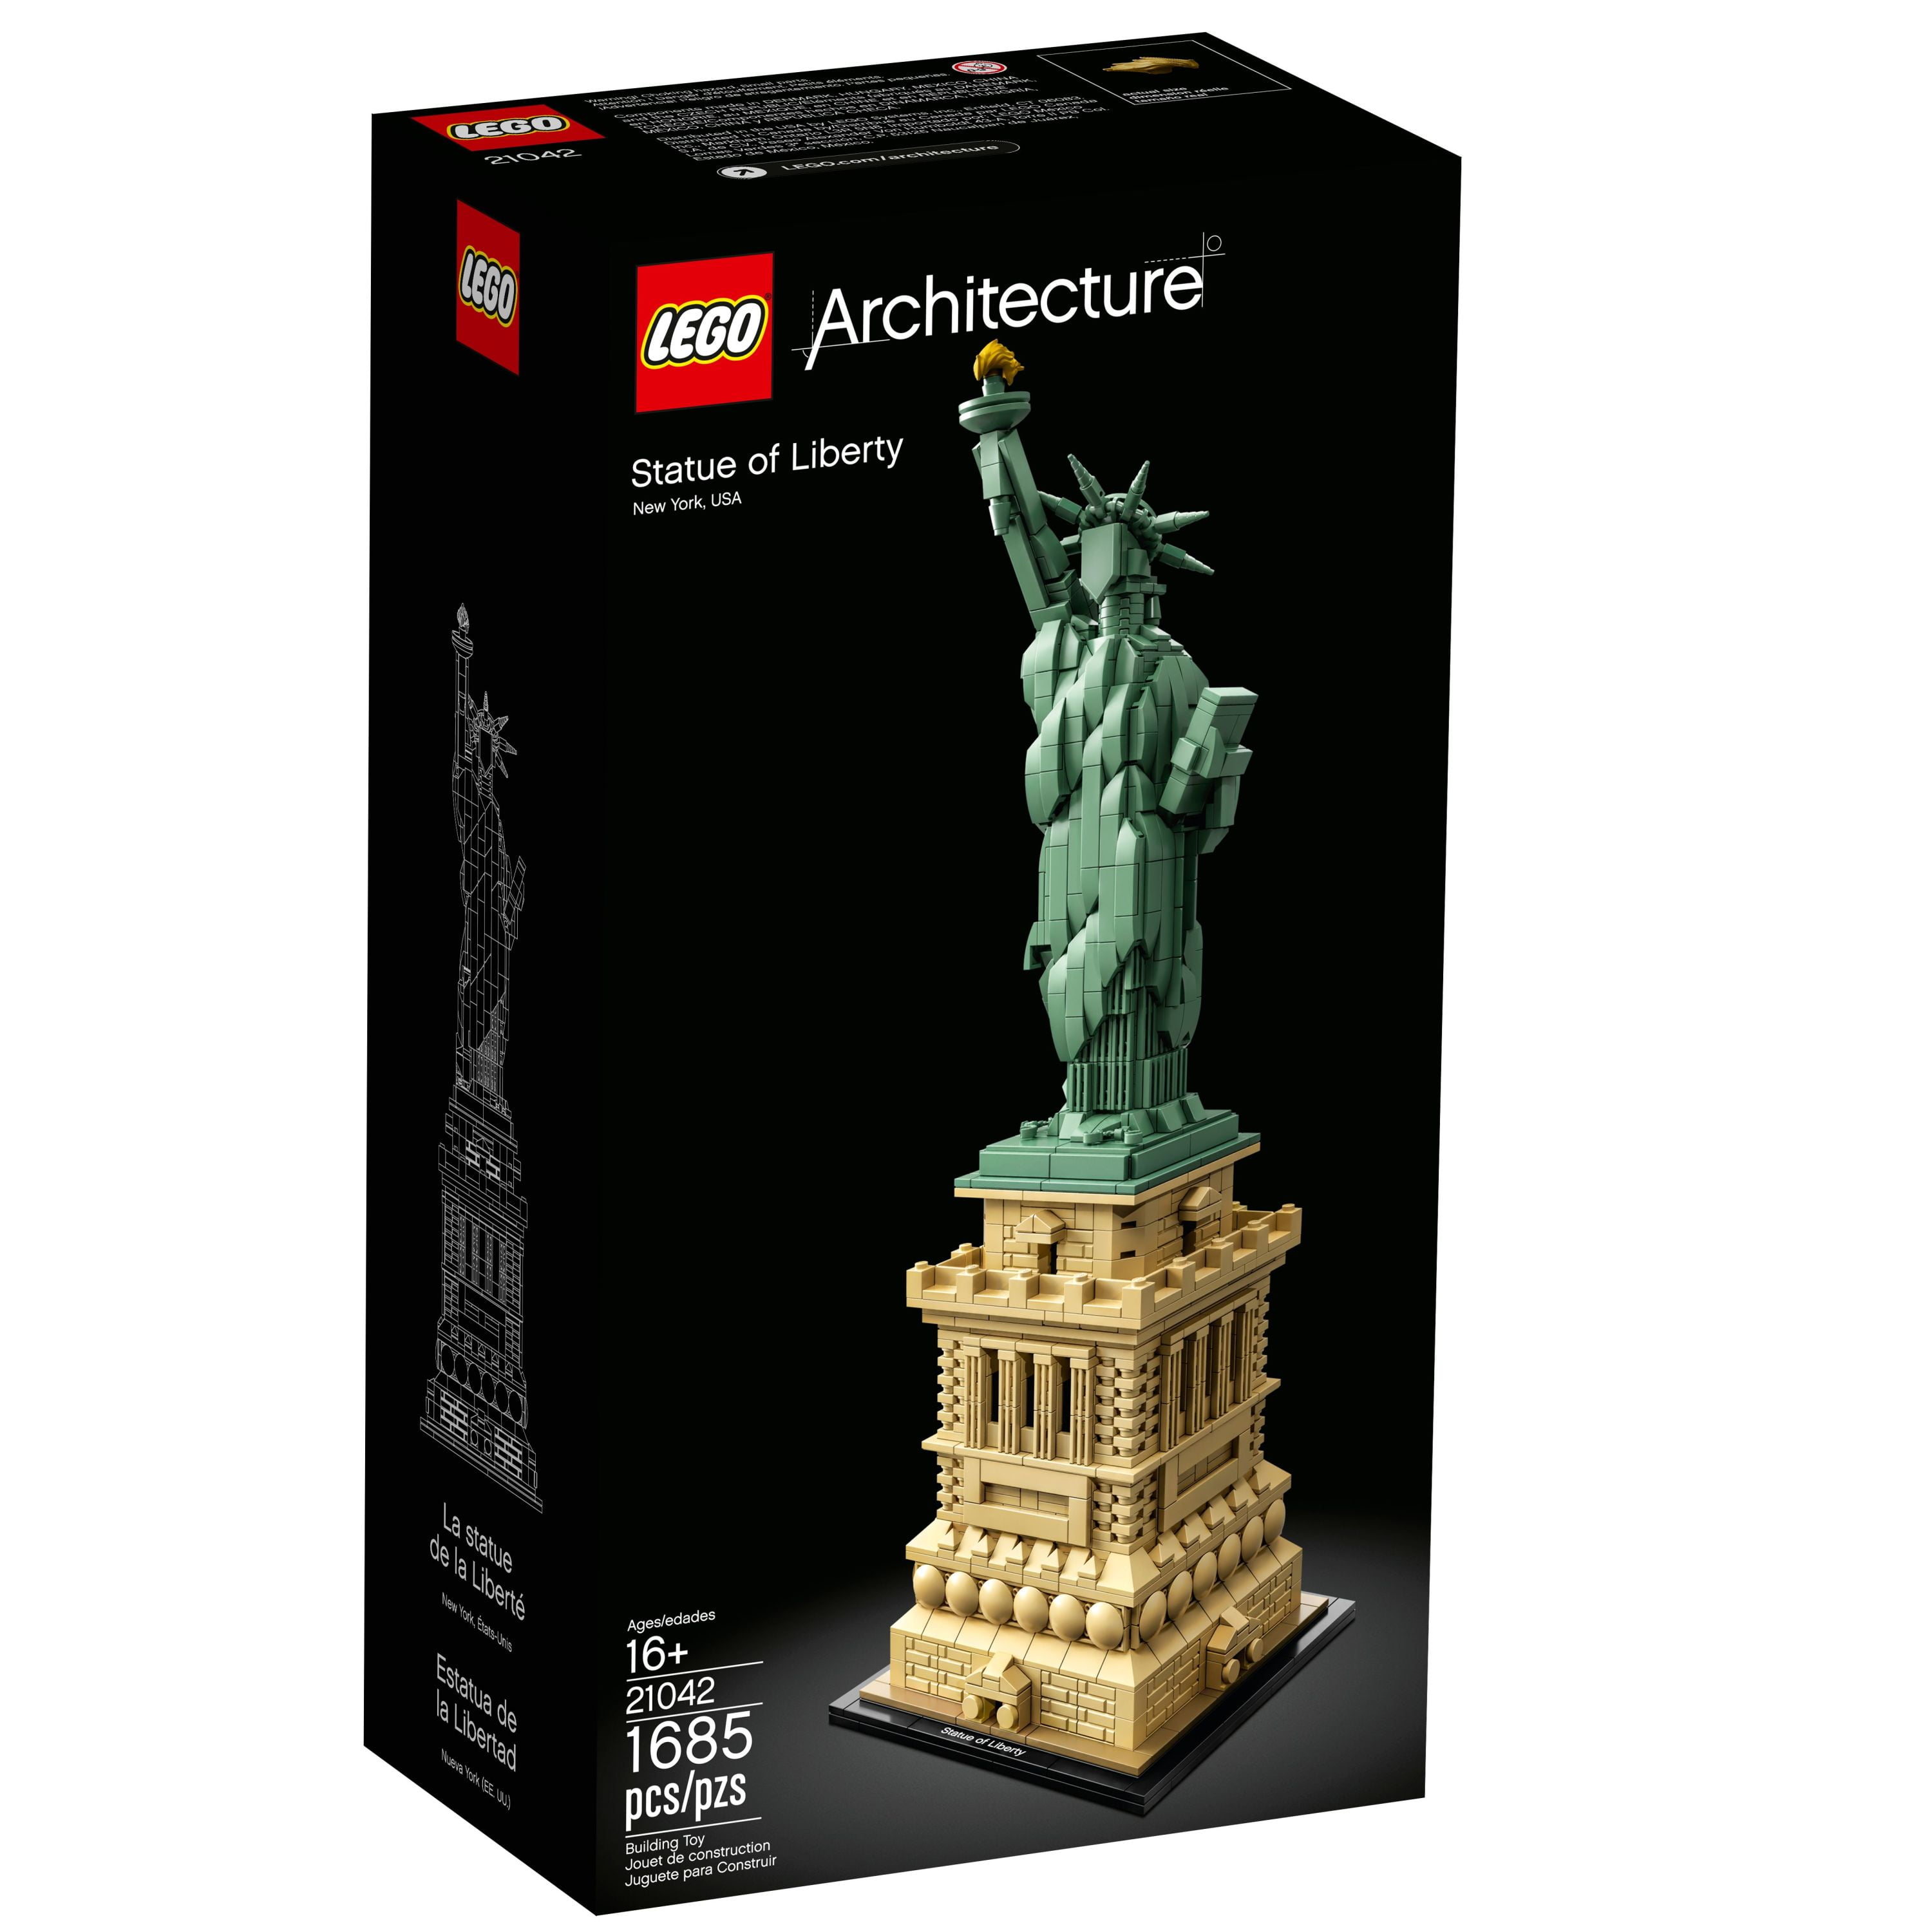 LEGO Architecture Statue of Liberty 21042 Model Building Set - Collectible New York City Souvenir, Creative Home Décor Office Centerpiece, Great Gift Idea for Adults and Teens - Walmart.com